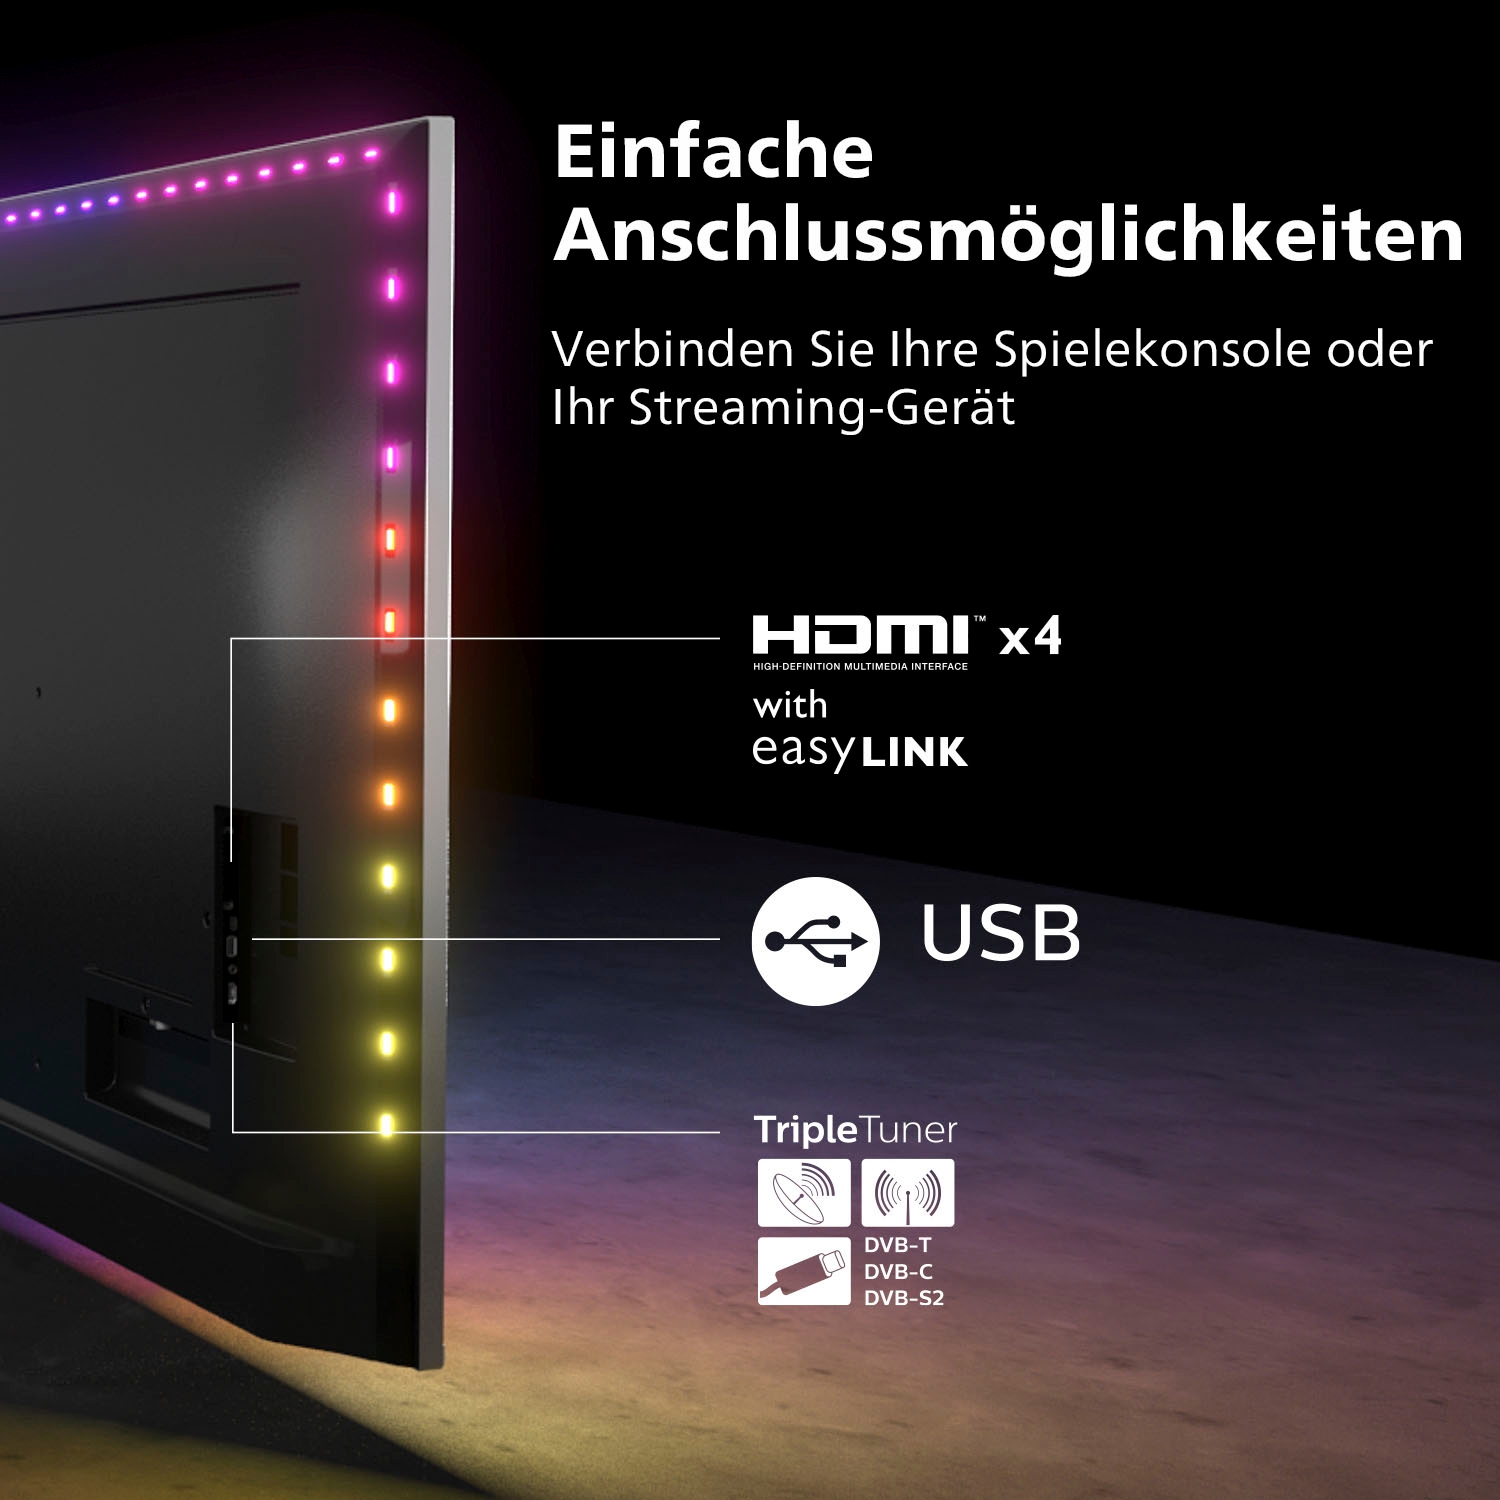 TV-Smart-TV-Google cm/86 kaufen Ultra LED-Fernseher Zoll, Philips Android TV OTTO HD, 217 bei 4K »86PUS8807/12«,